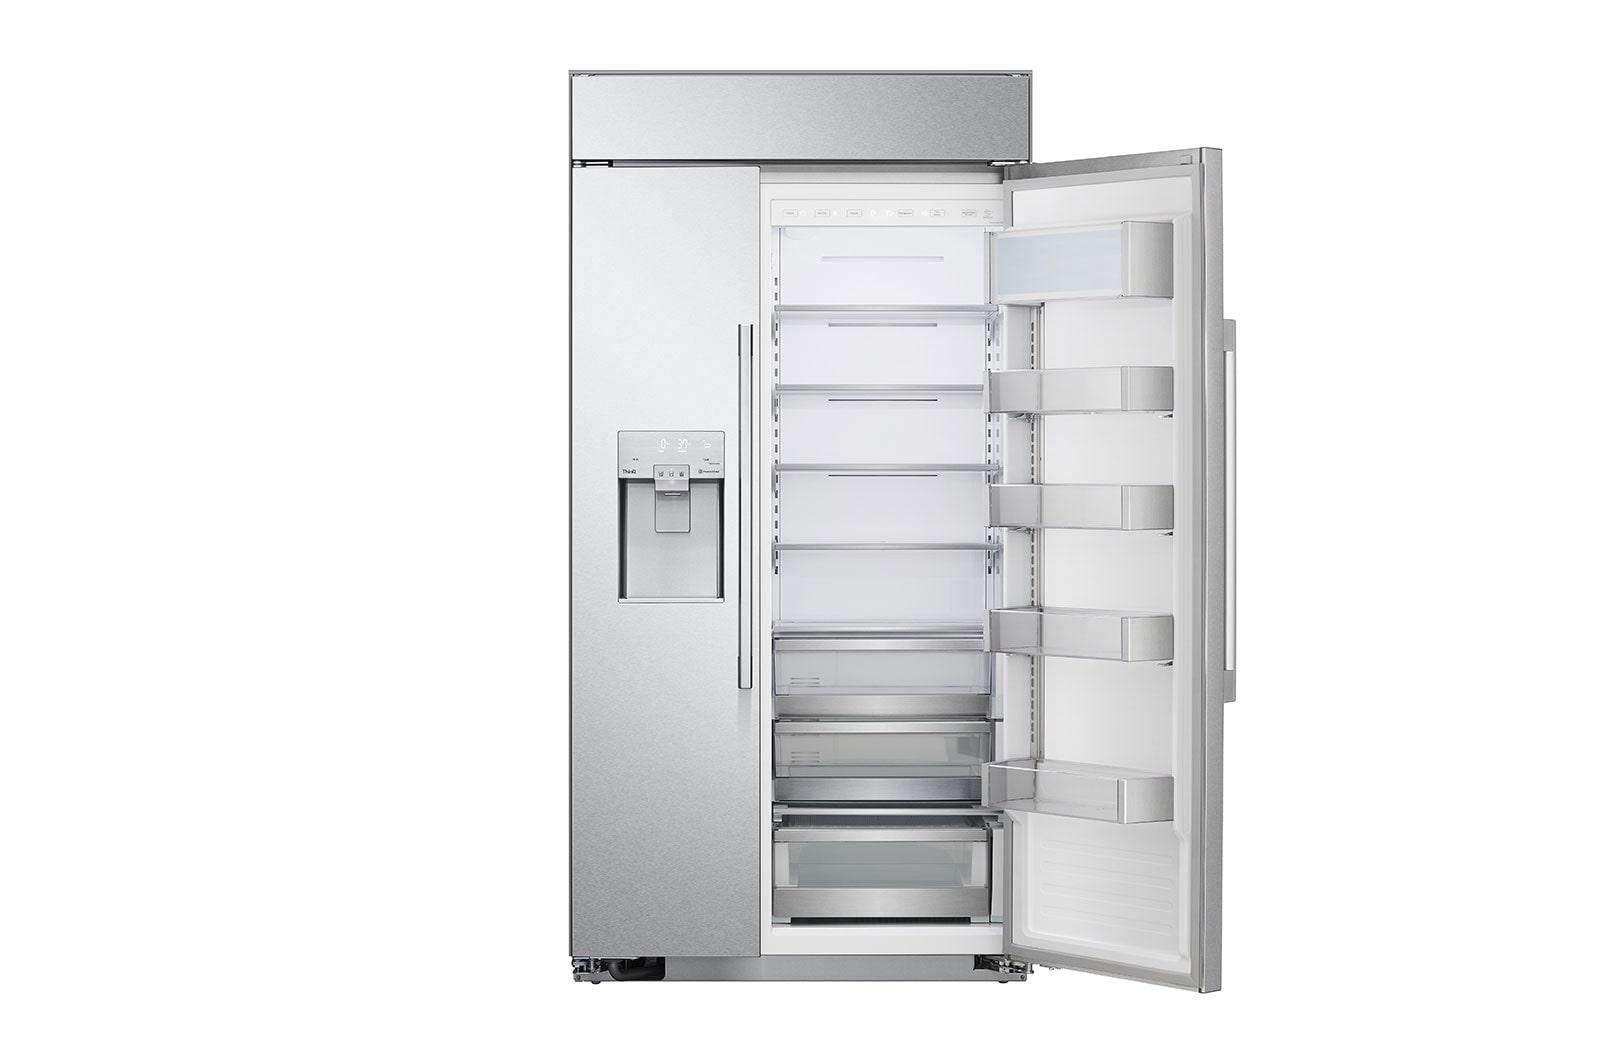 LG STUDIO 26 cu. ft. Smart Side-by-Side Built-In Refrigerator with Ice